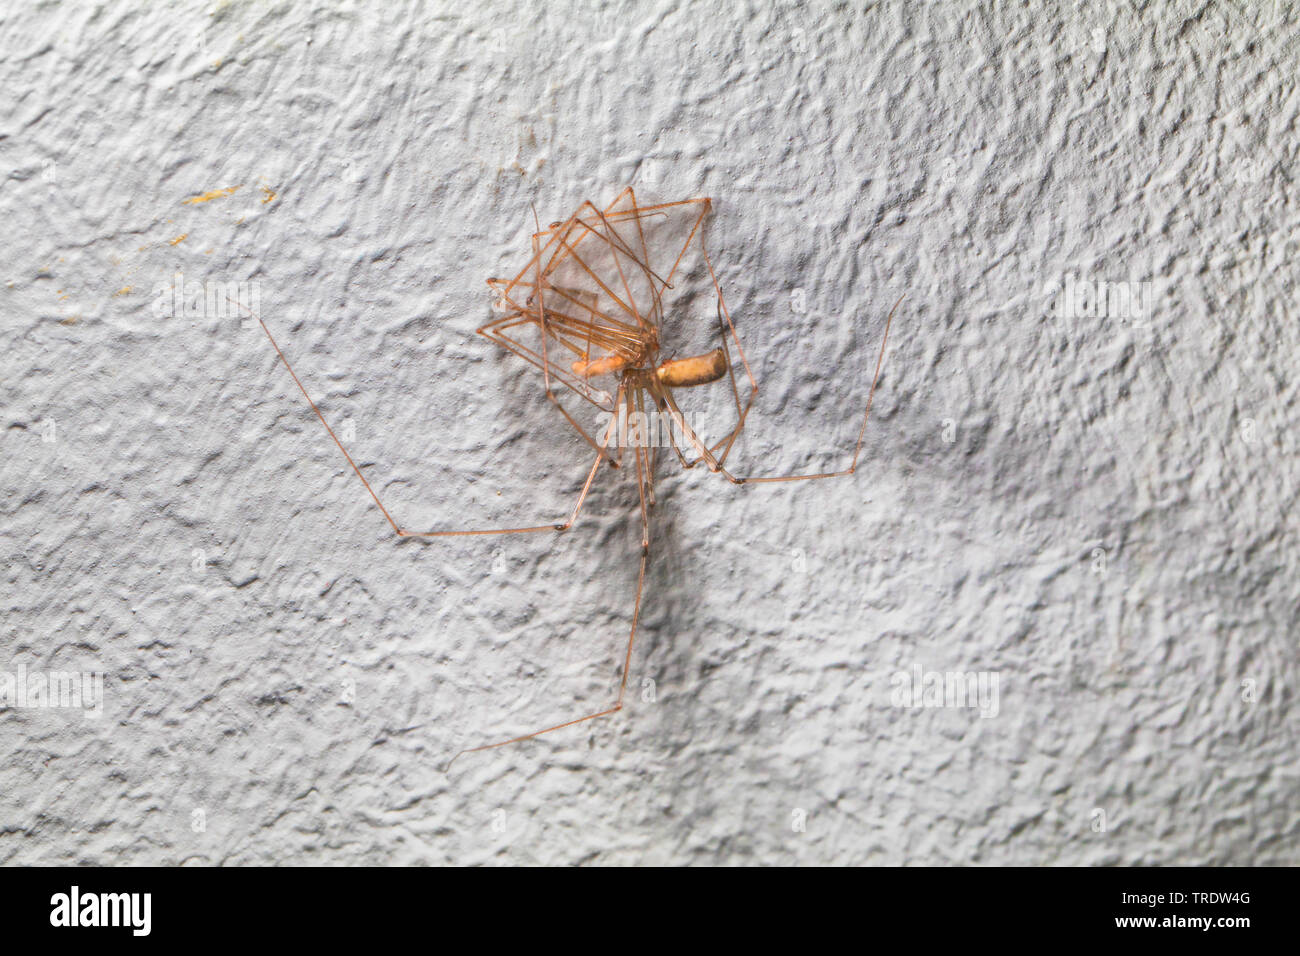 Long-bodied cellar spider, Longbodied cellar spider (Pholcus phalangioides), exuviae on the room wall, Germany, Bavaria Stock Photo